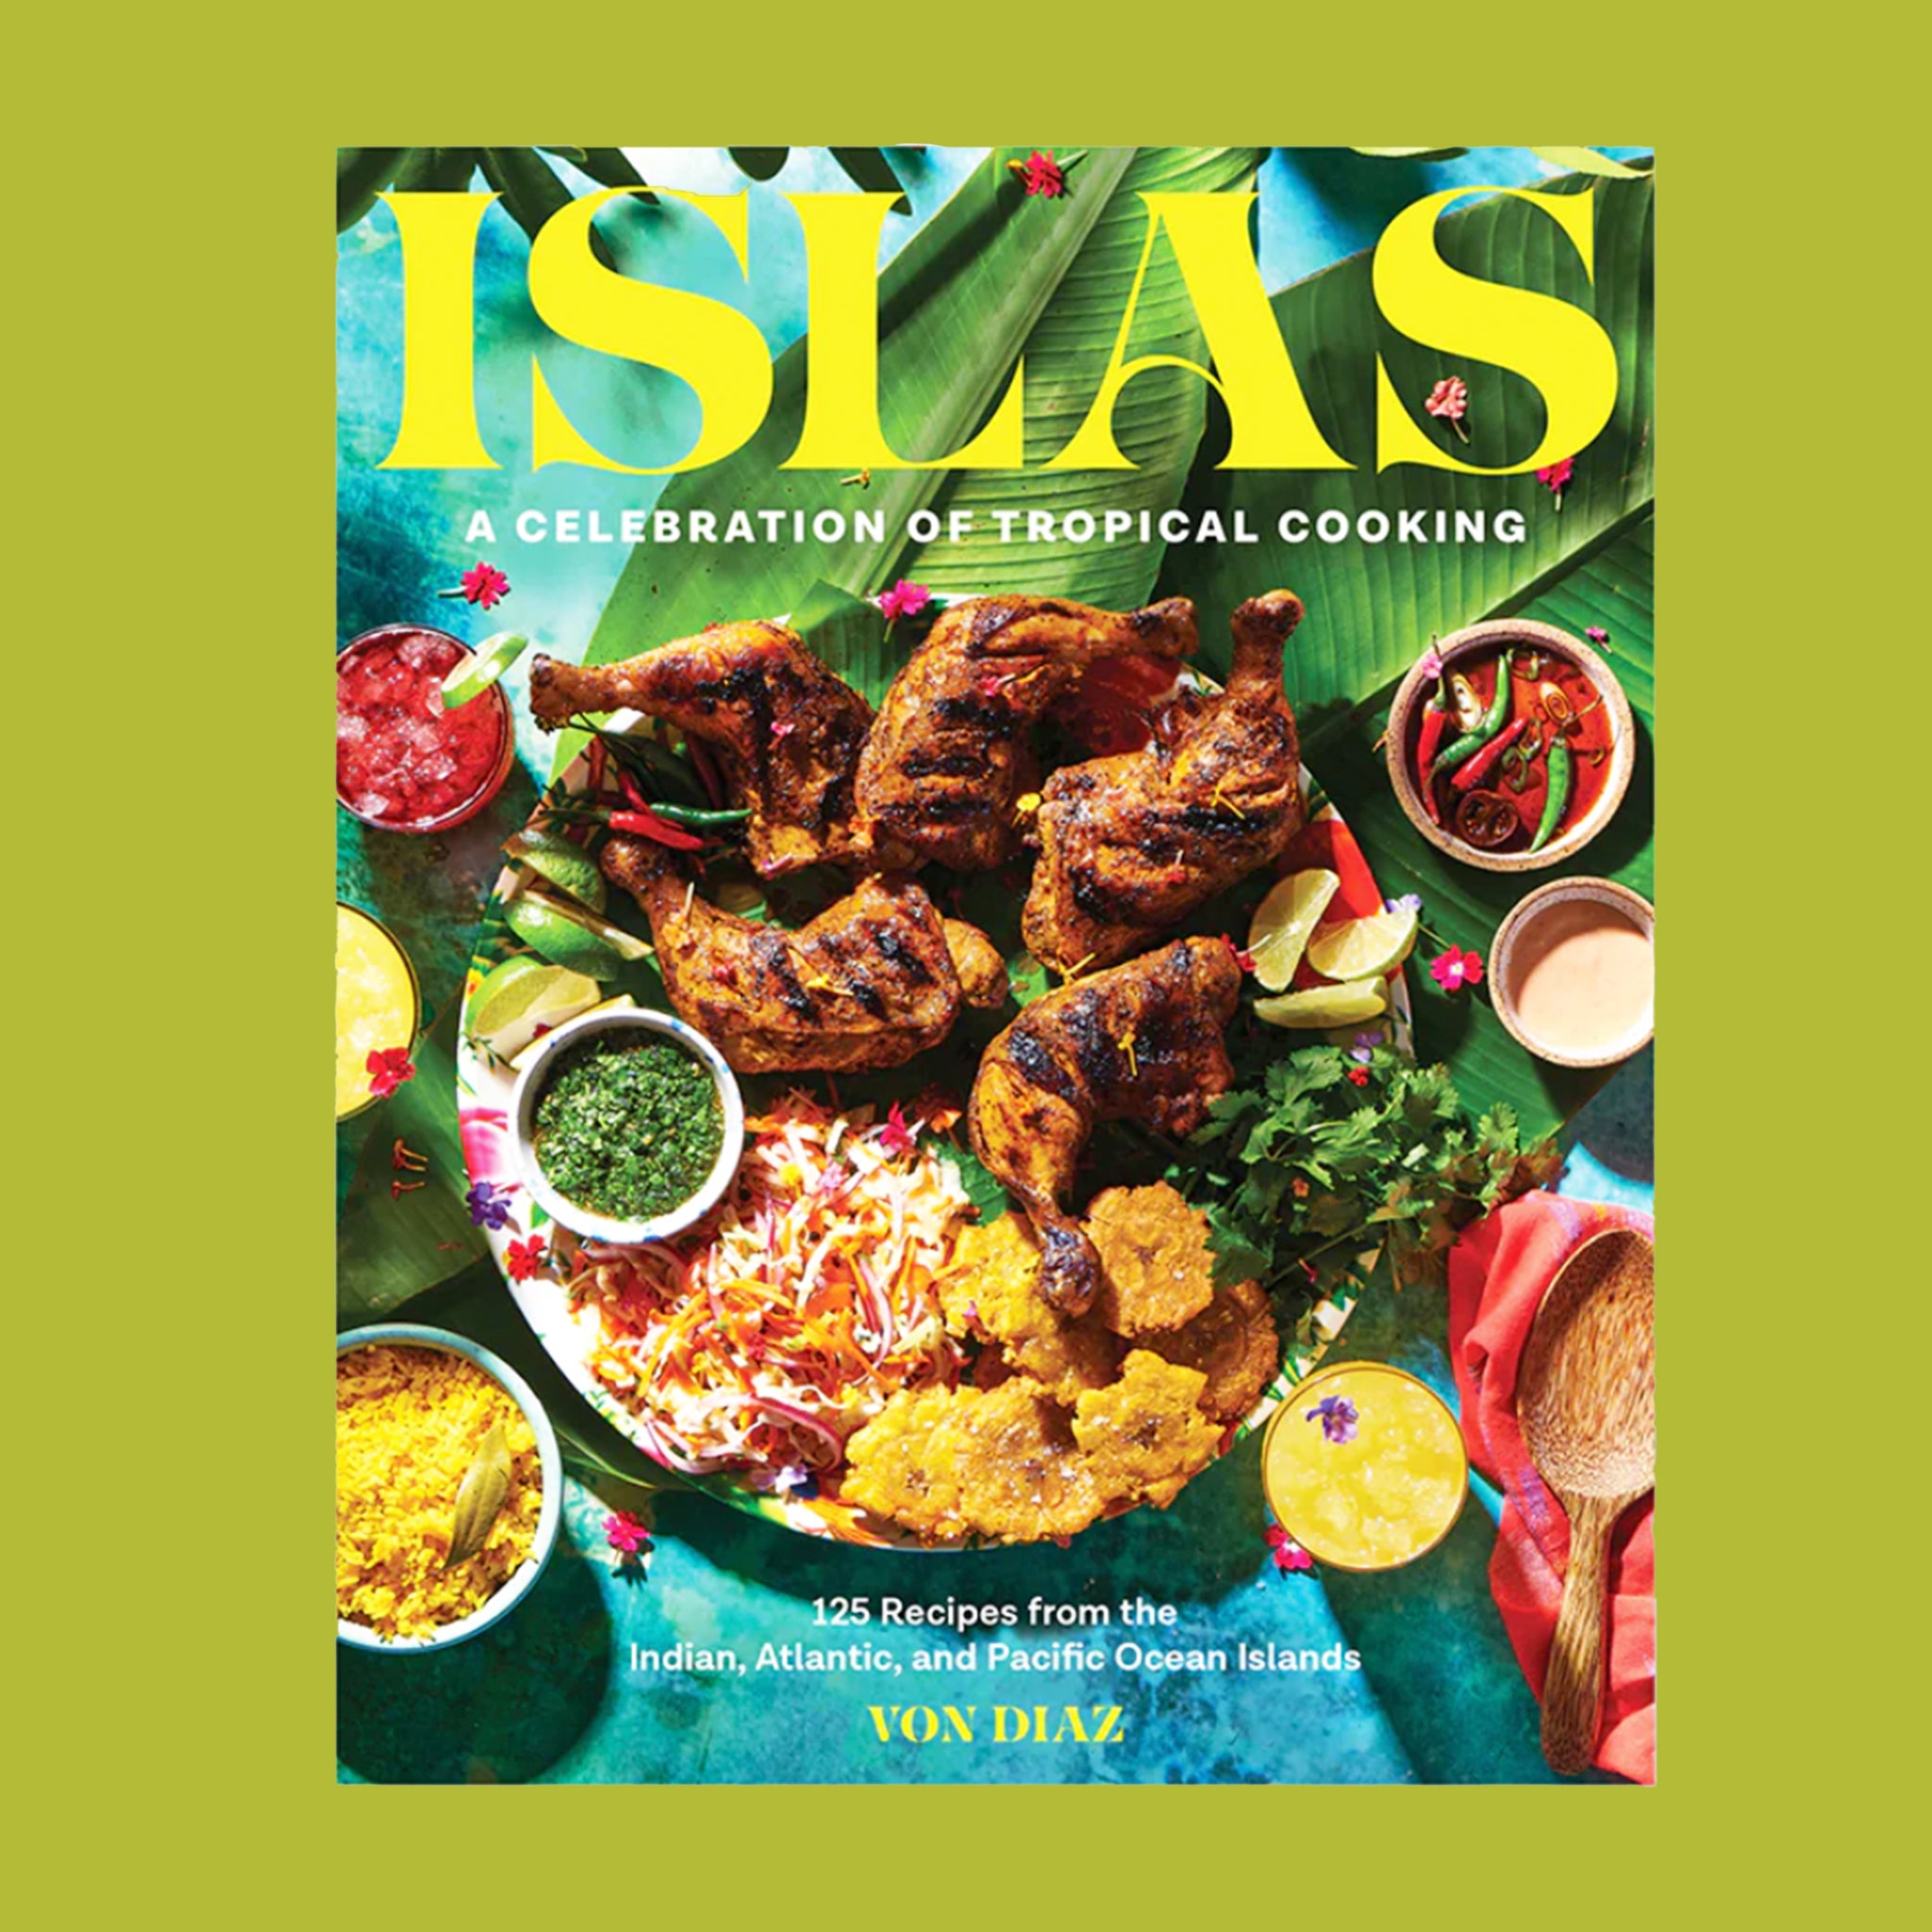 On a bright green background is a colorful book cover with a plate full of grilled food and the title above that reads, "Islas A Celebration of Tropical Cooking".